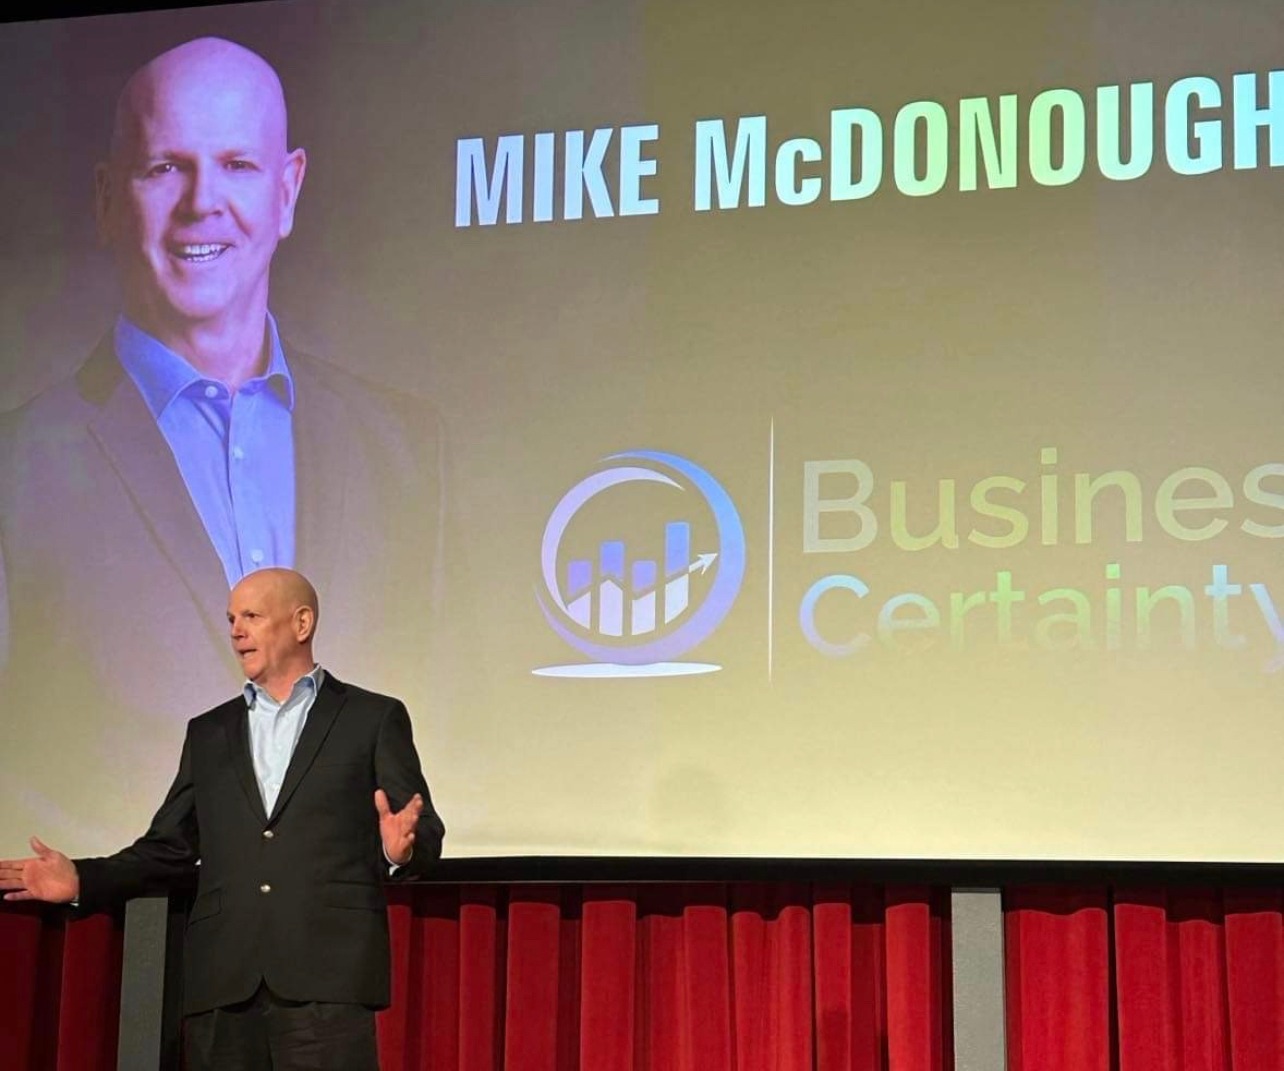 MIKE MCDONOUGH LAUNCHES BUSINESS